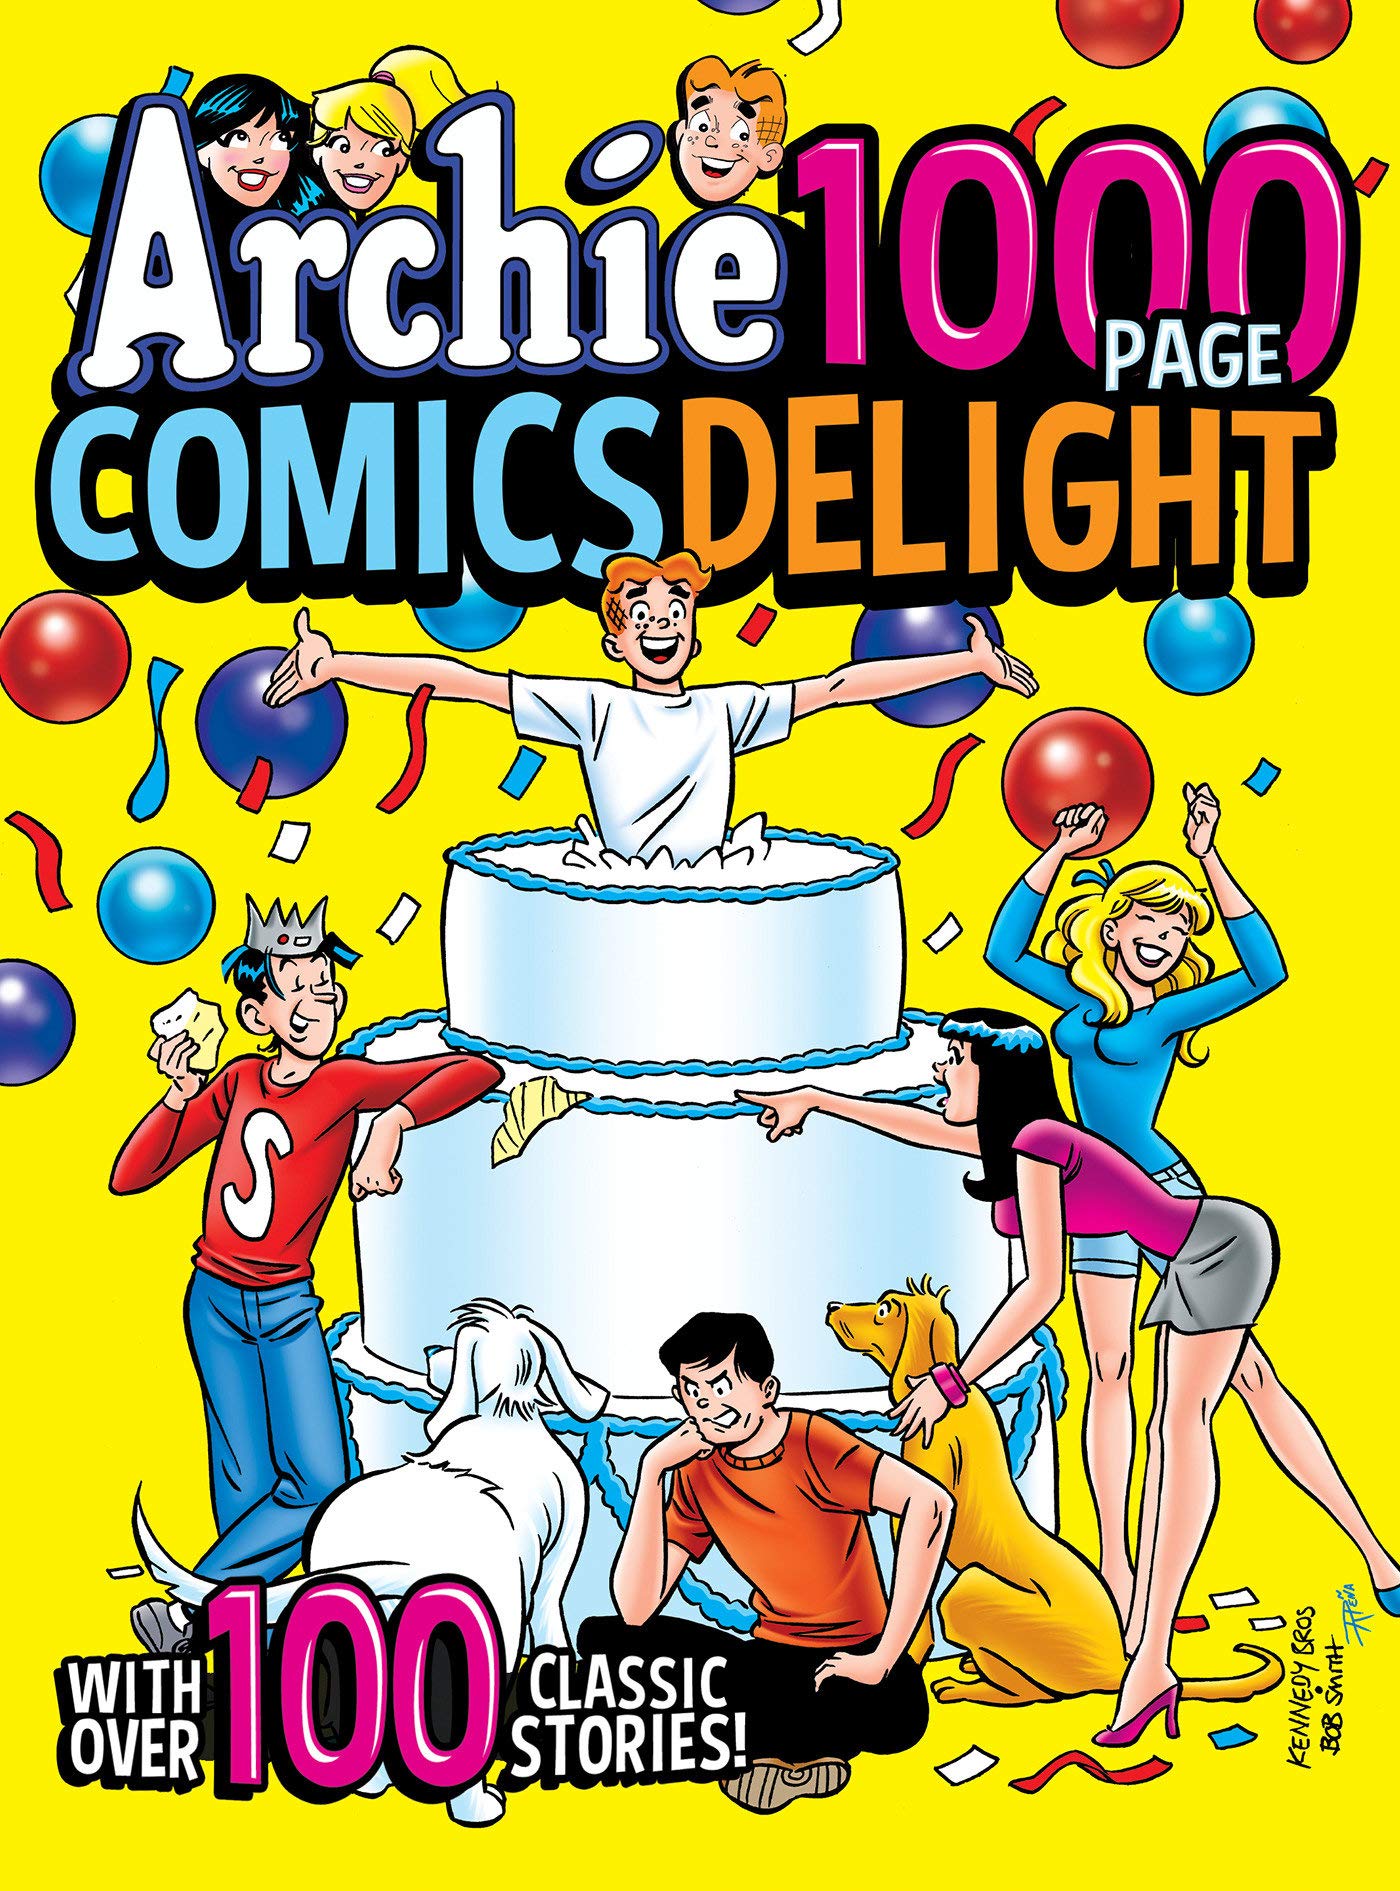 ARCHIE 1000 PAGE DELIGHT